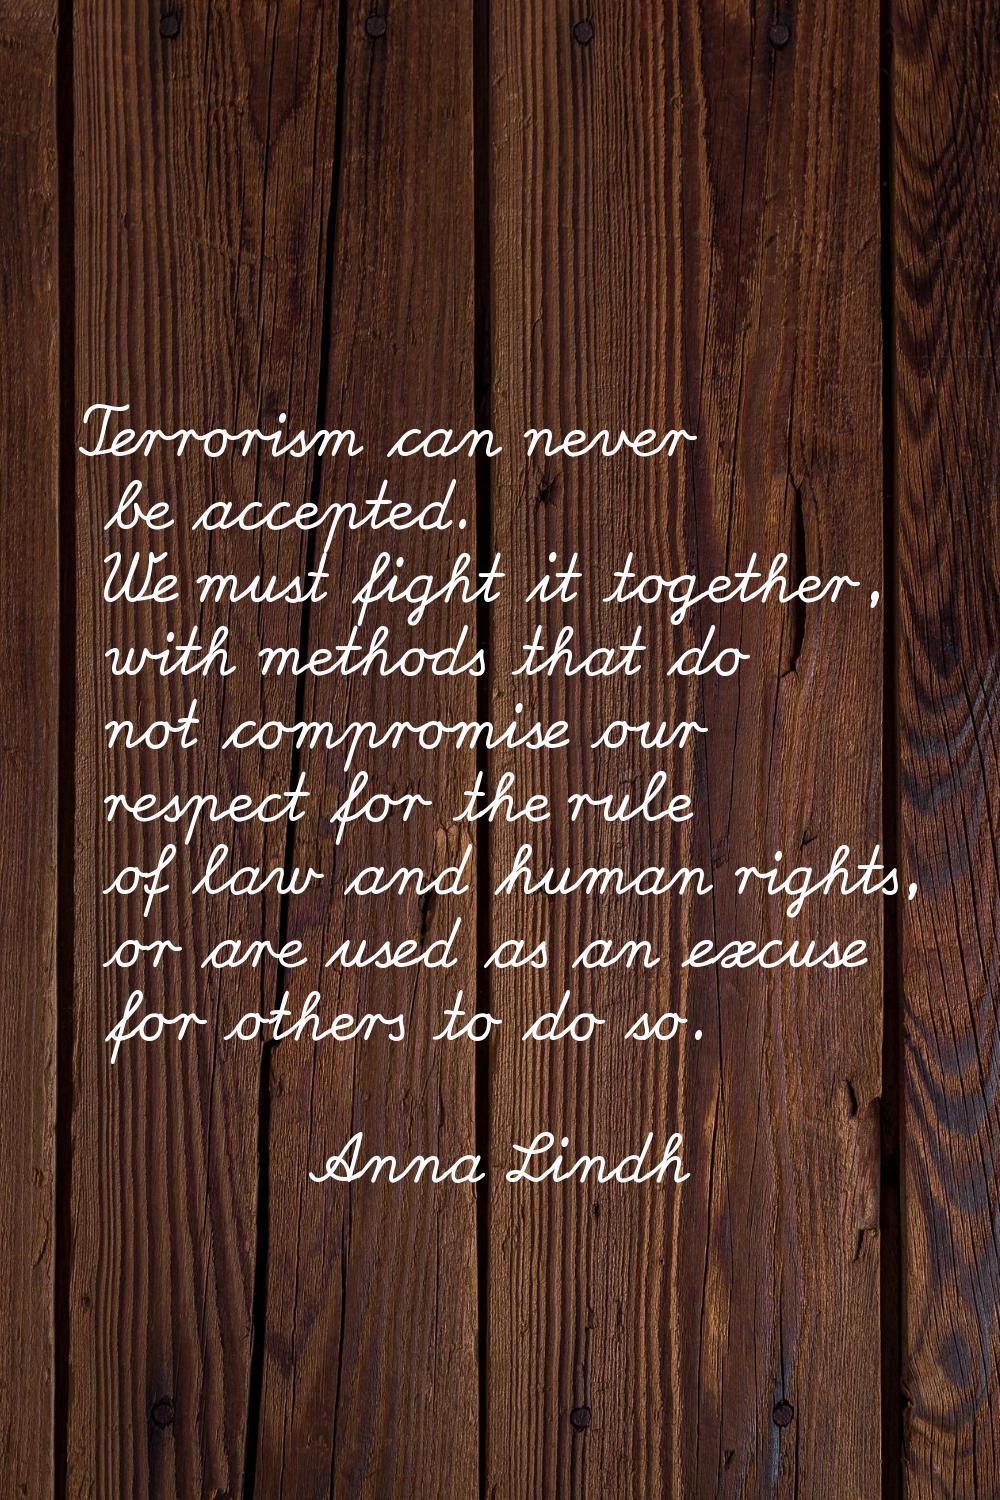 Terrorism can never be accepted. We must fight it together, with methods that do not compromise our